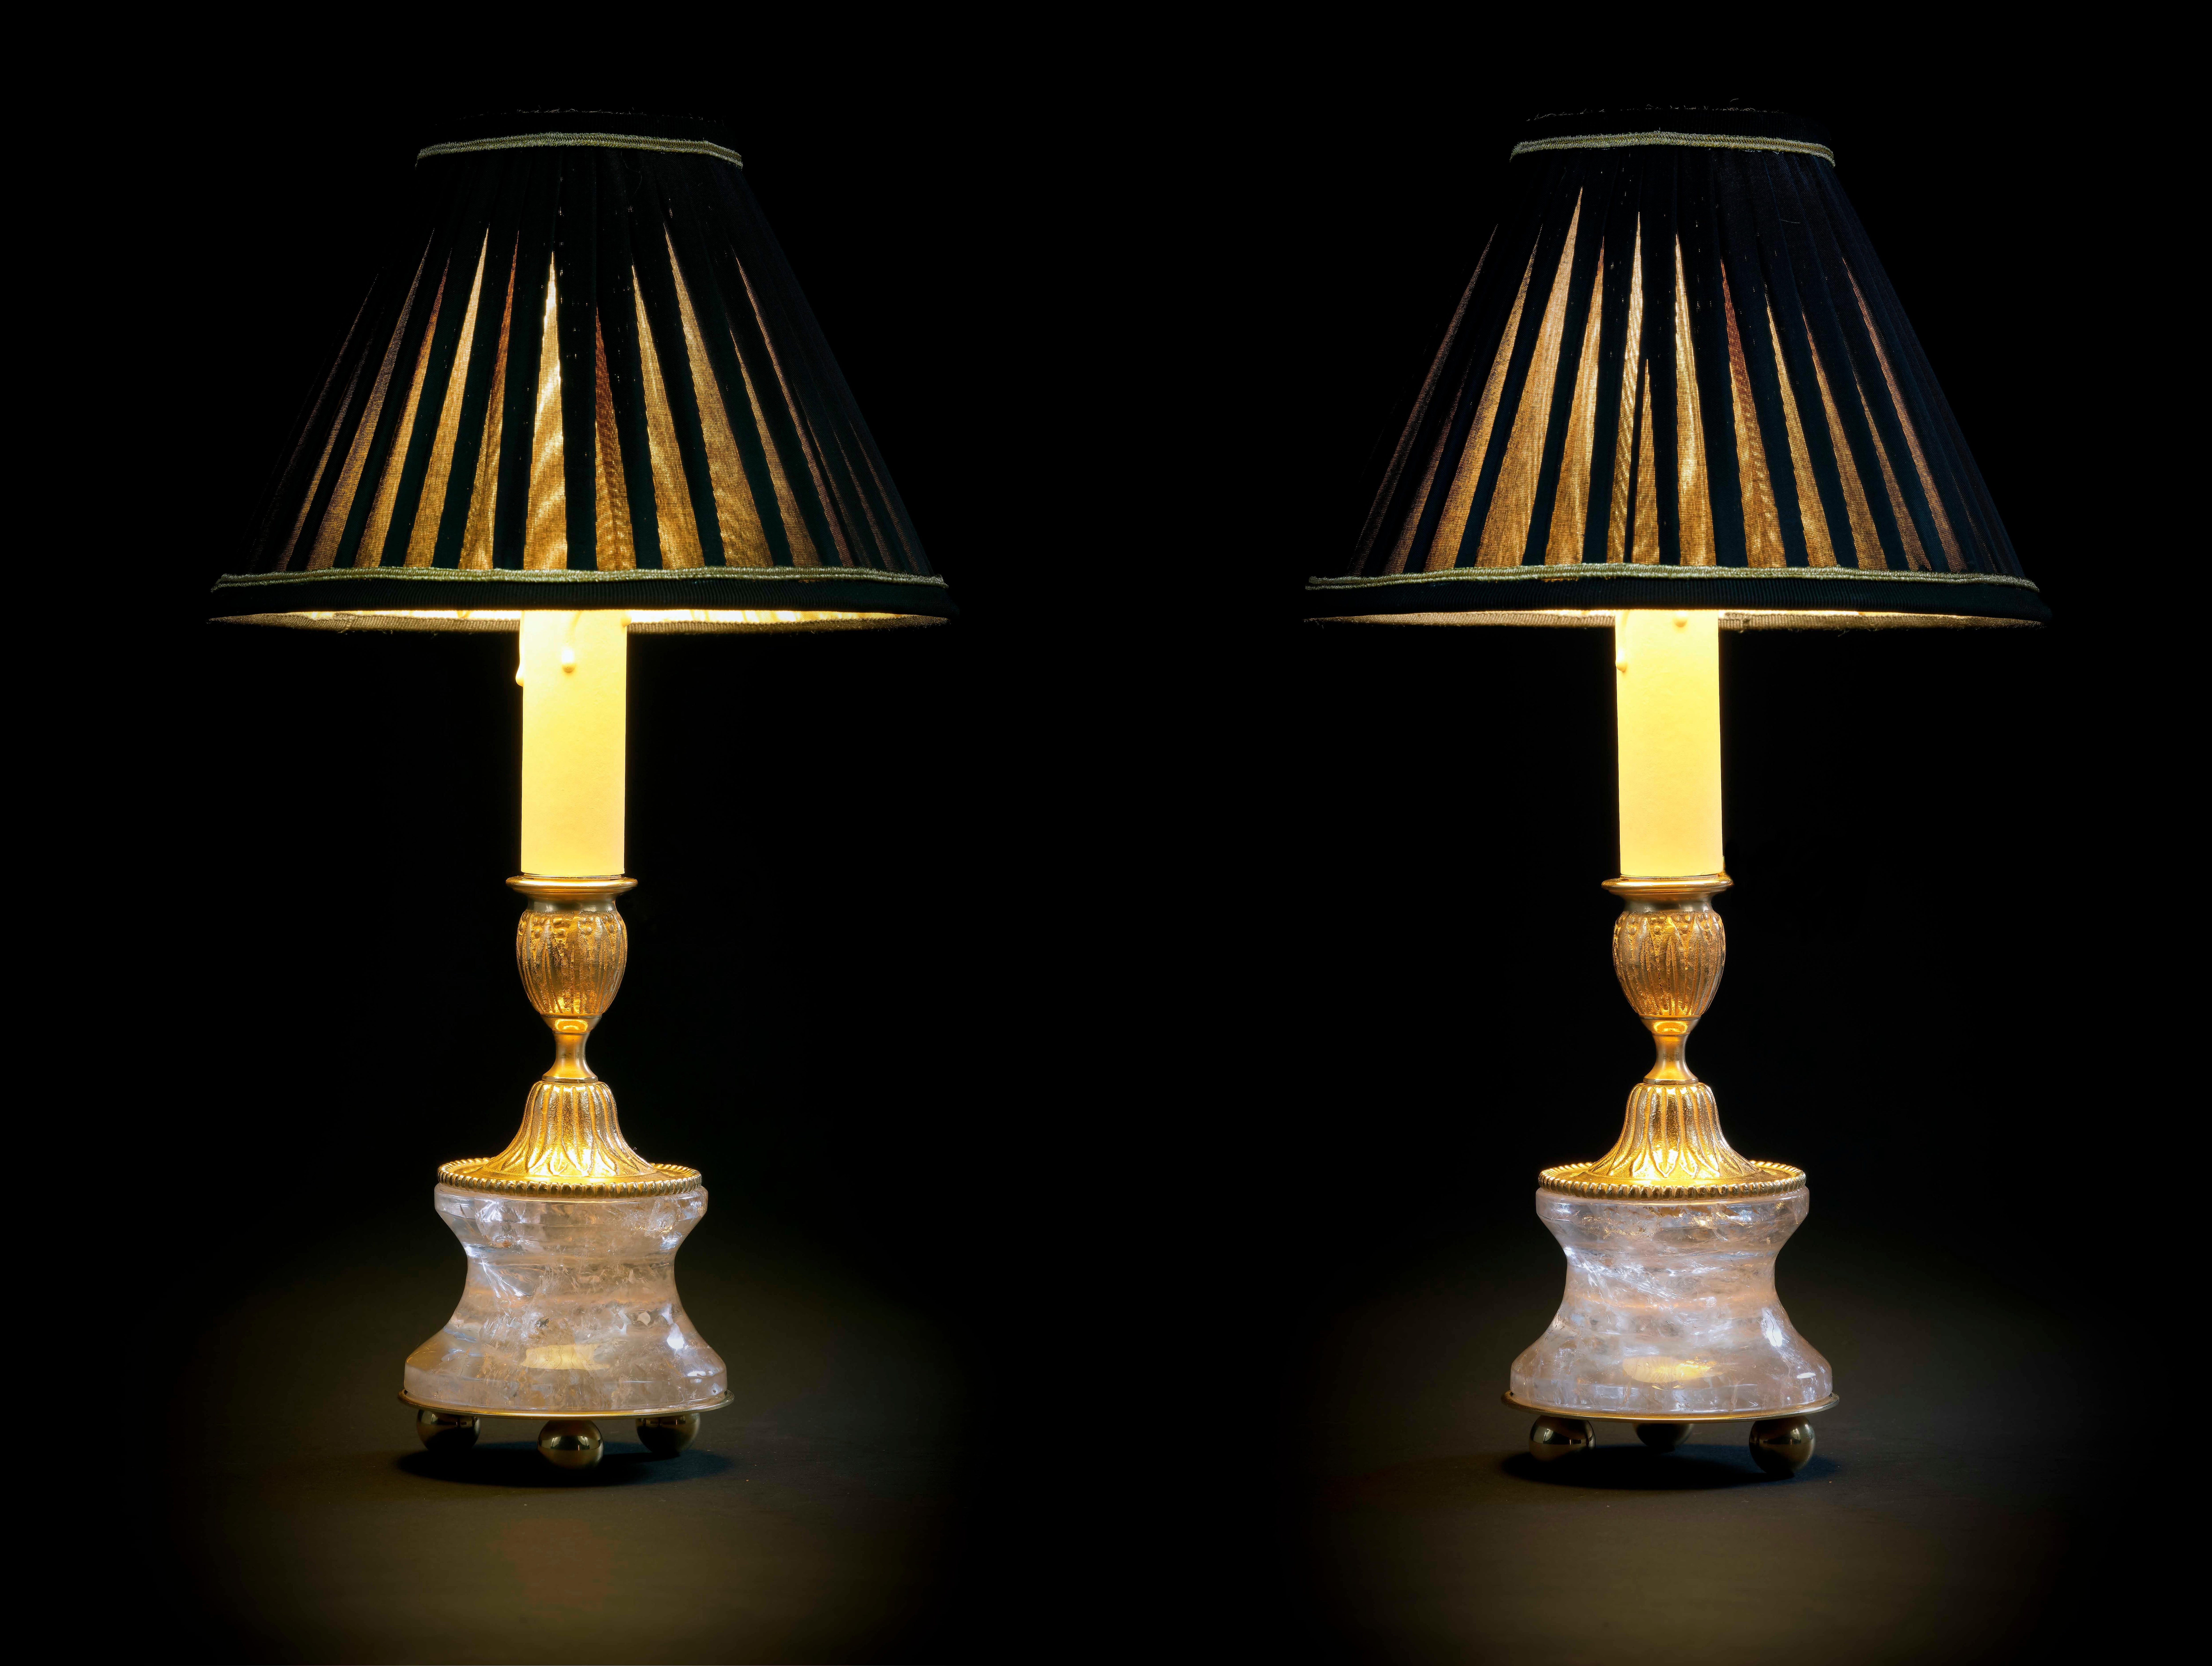 Rock crystal Louis The XVI th Style 24-karat ormolu gilding bronze black shades made by Alexandre Vossion. This model can be also used as candlesticks to make your dining table so chic ... Others colors for the lampshades are also available and